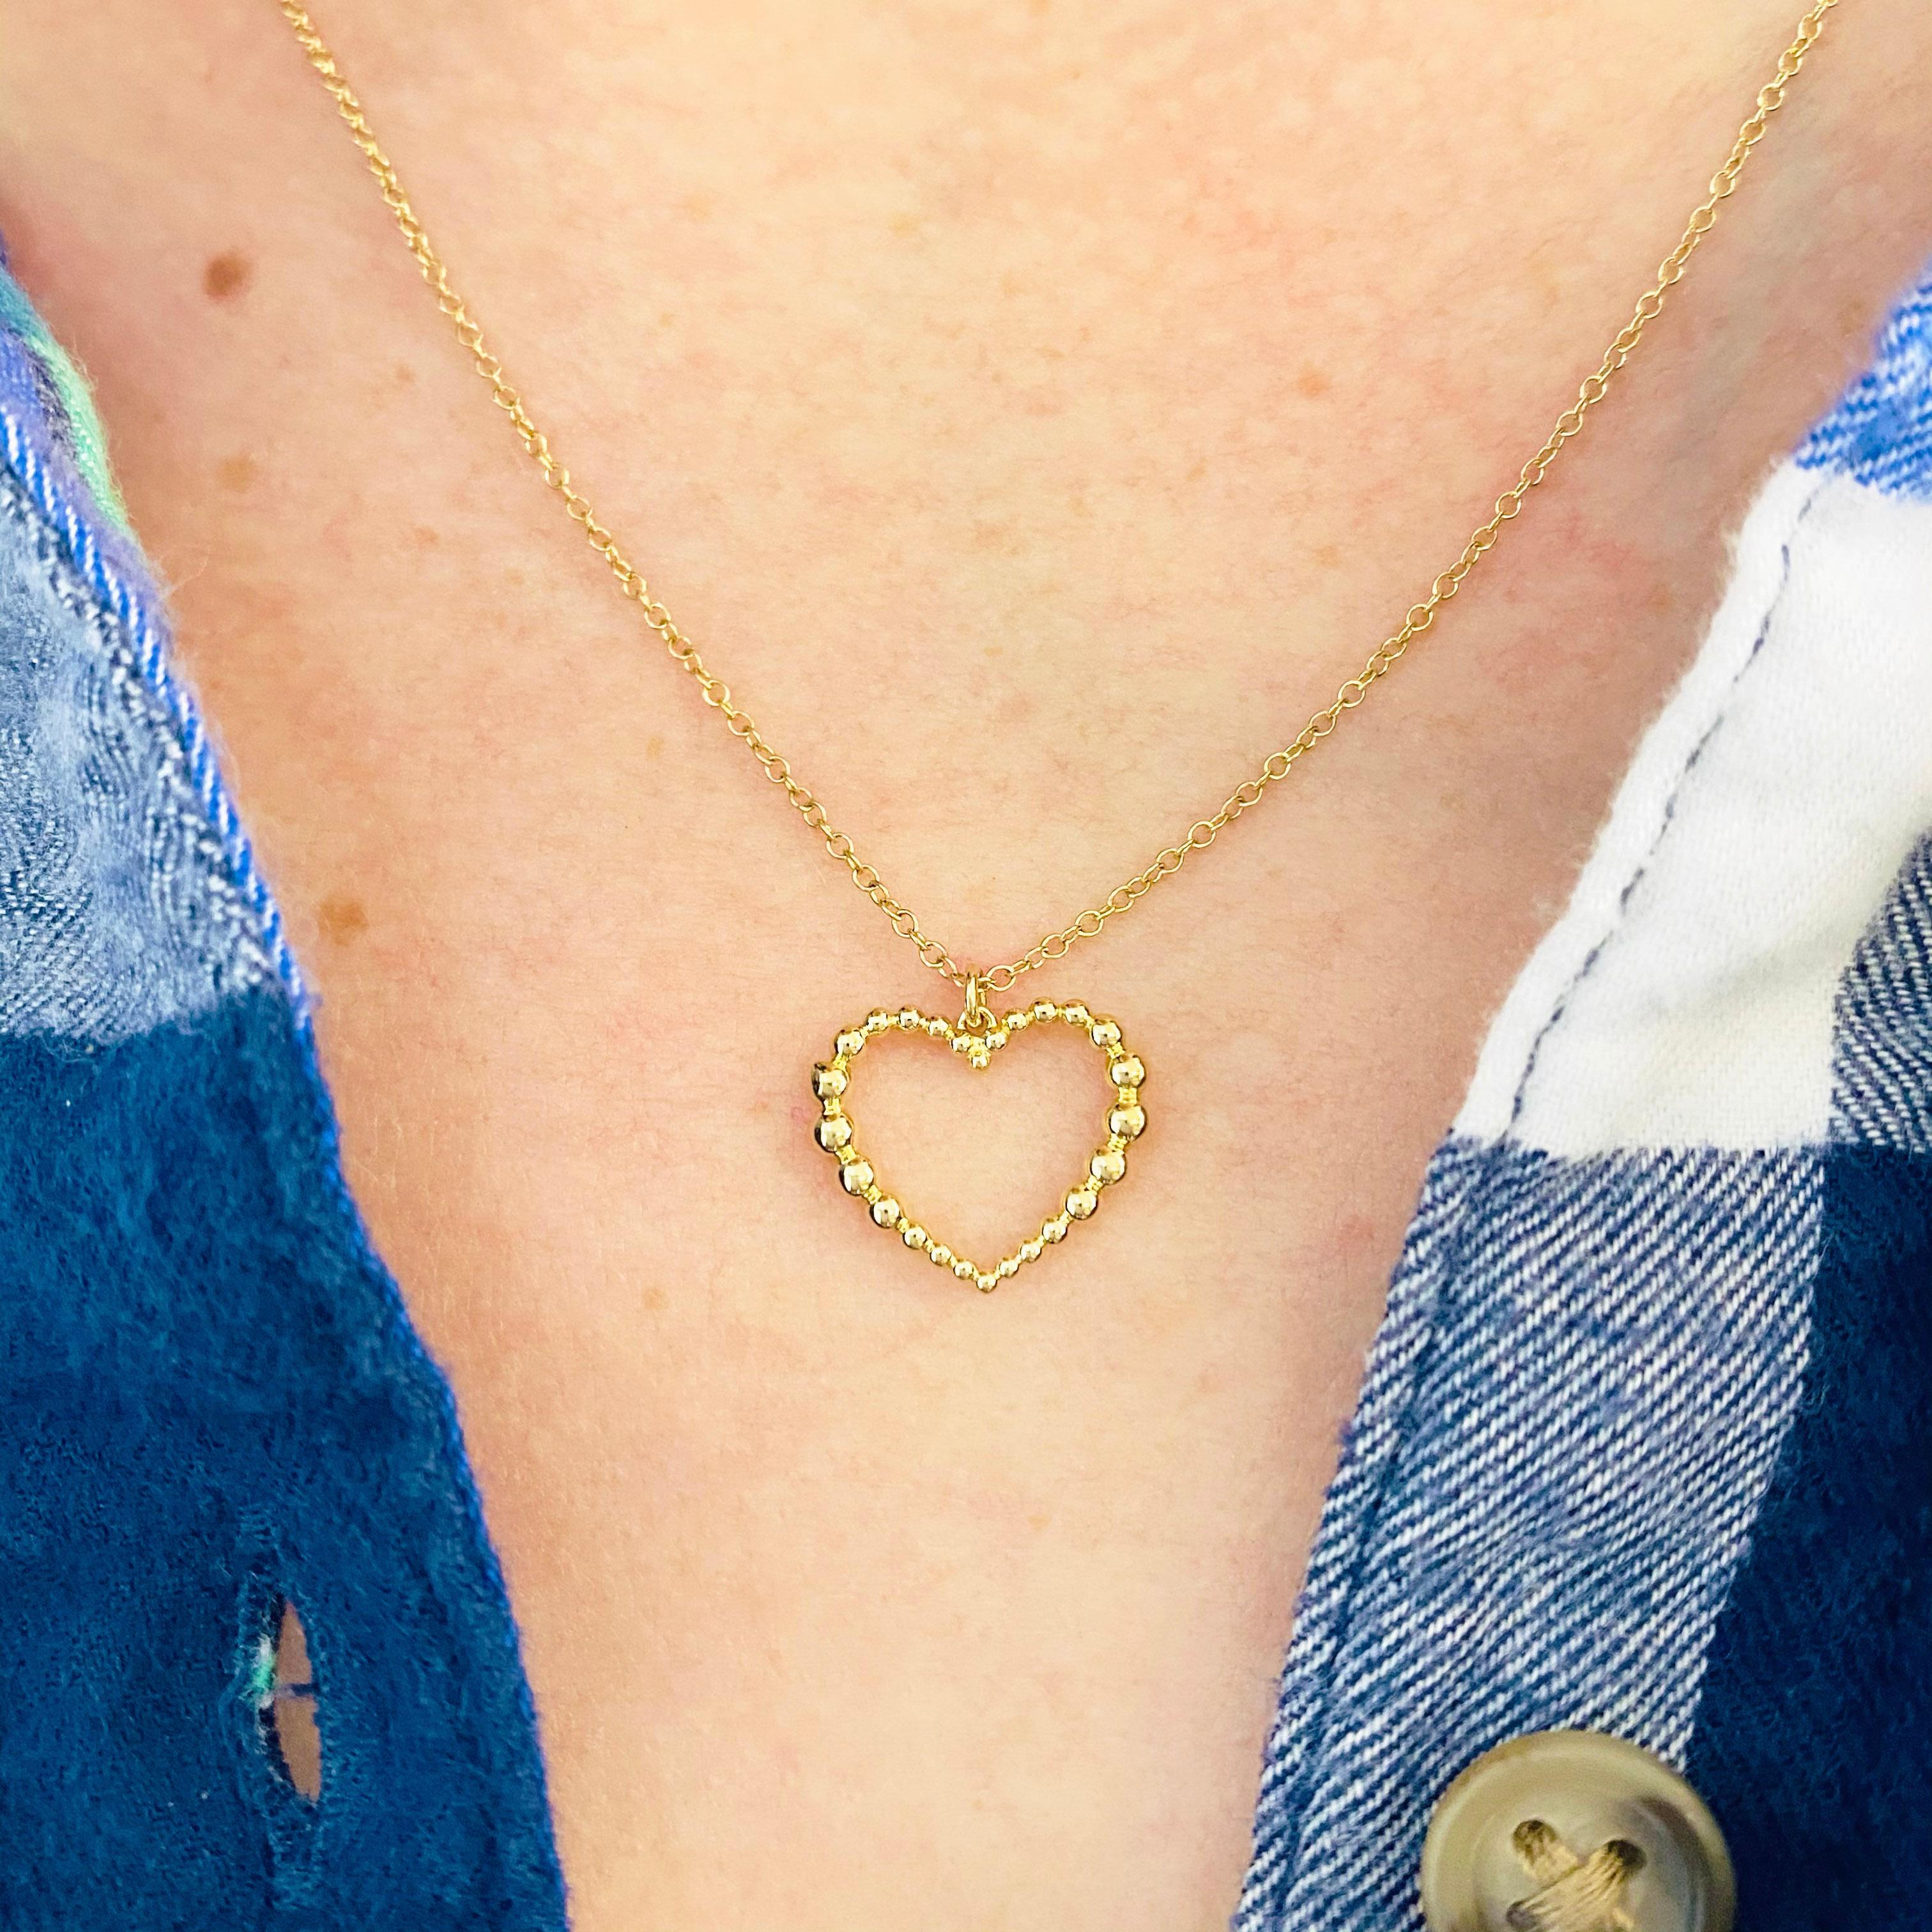 This gorgeous petite 14k yellow gold open heart pendant is sure to put a smile on anyone's face! This necklace looks beautiful worn by itself and also looks wonderful in a necklace stack. The beads on this necklace are three dimensional as they go